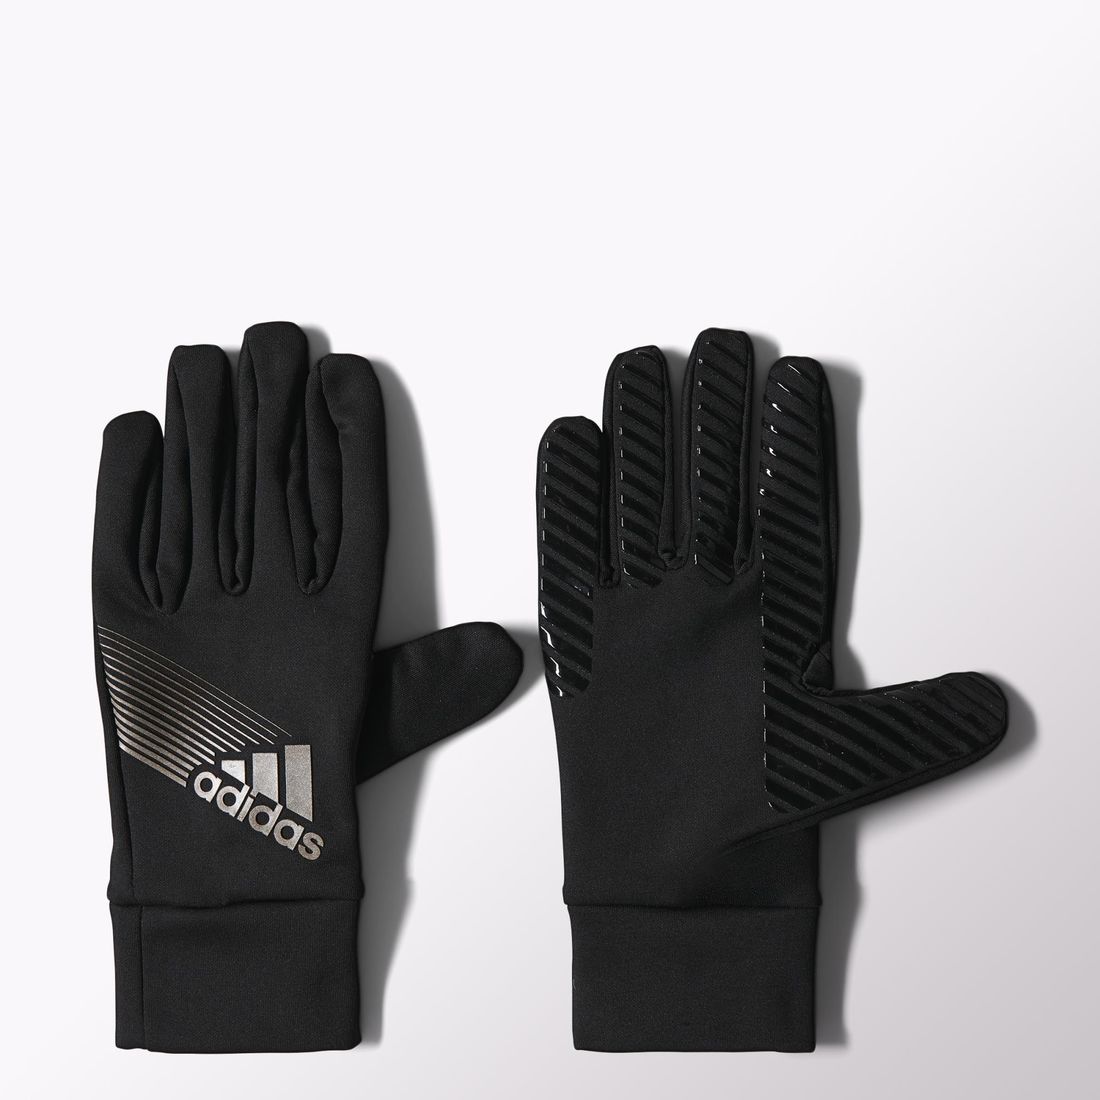 adidas climaproof gloves